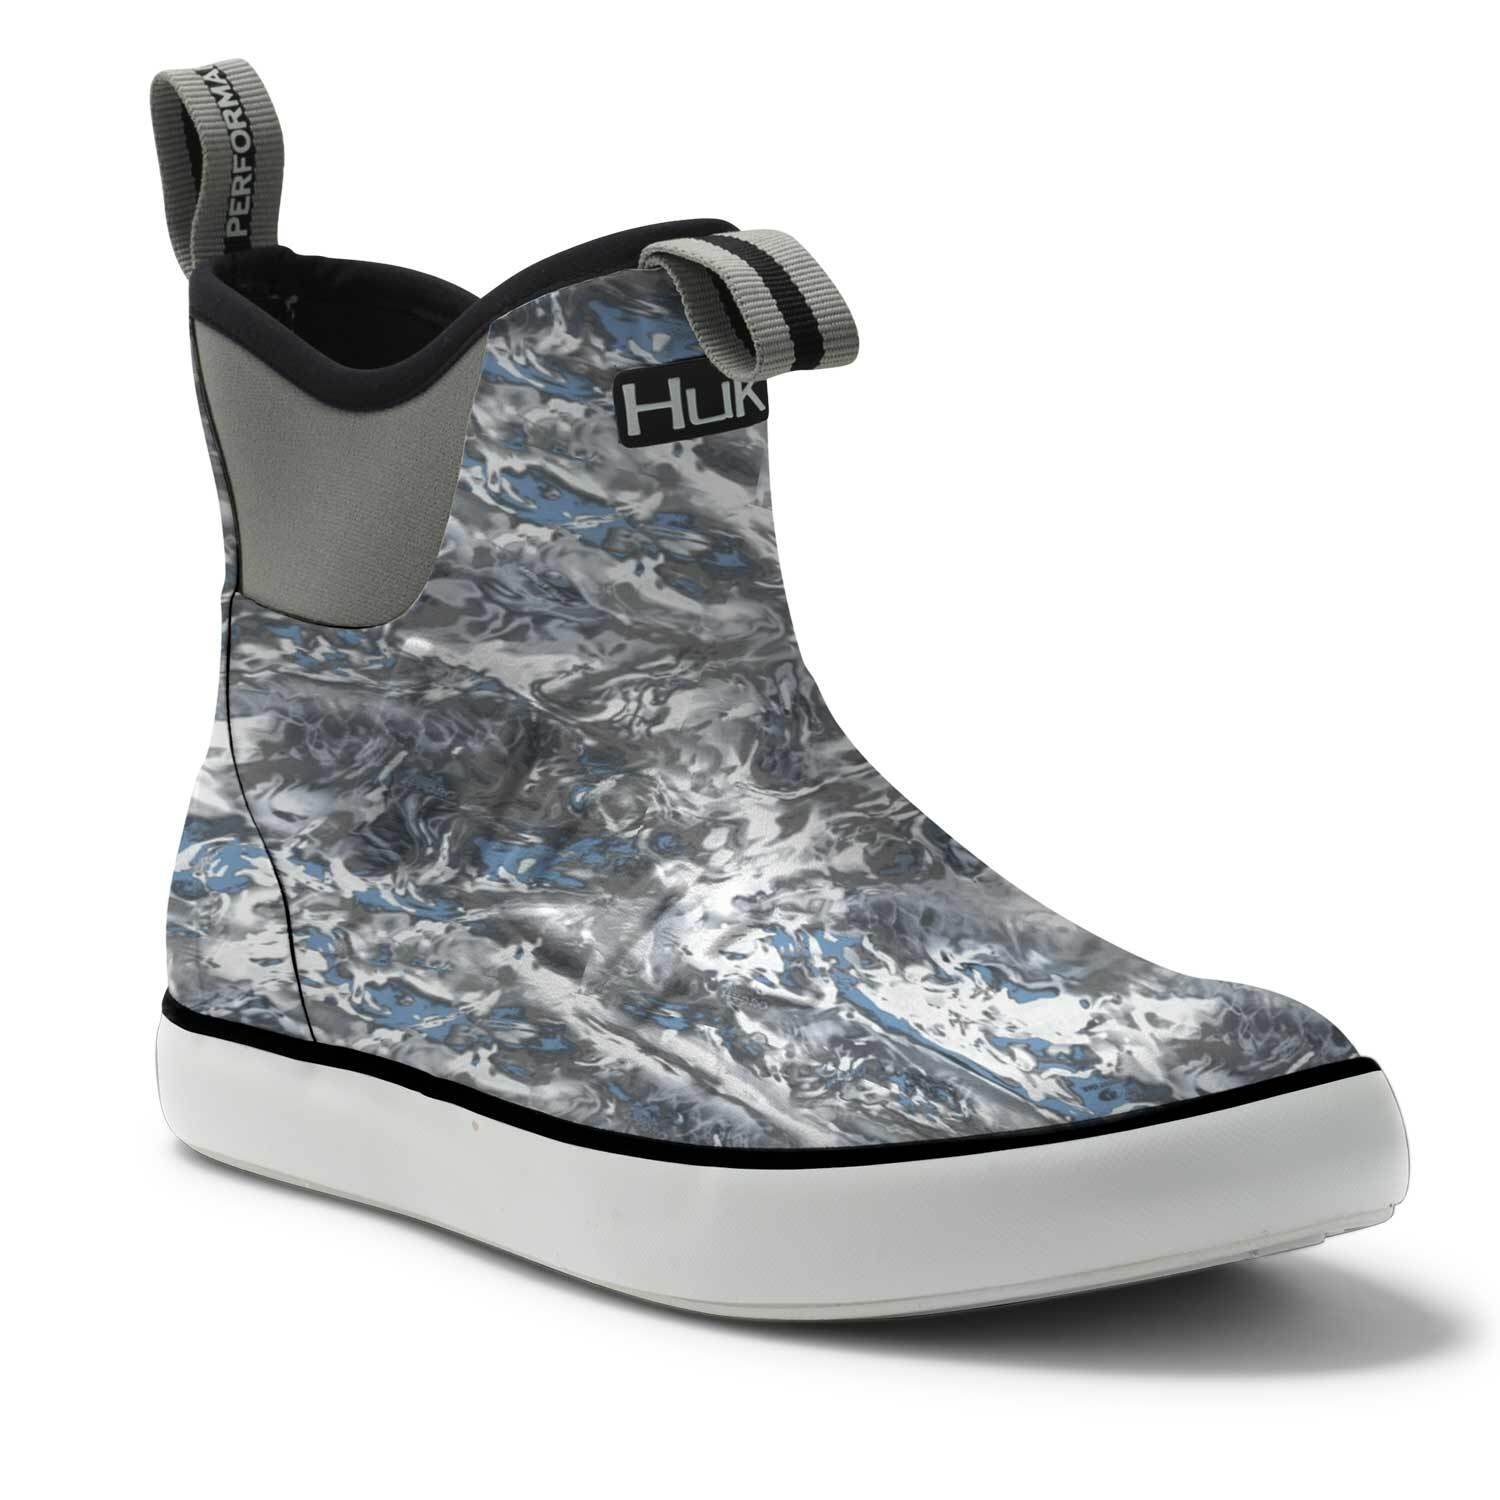 Huk Rogue Wave Camo performance fishing boots. Overcast Grey. Men's size 9